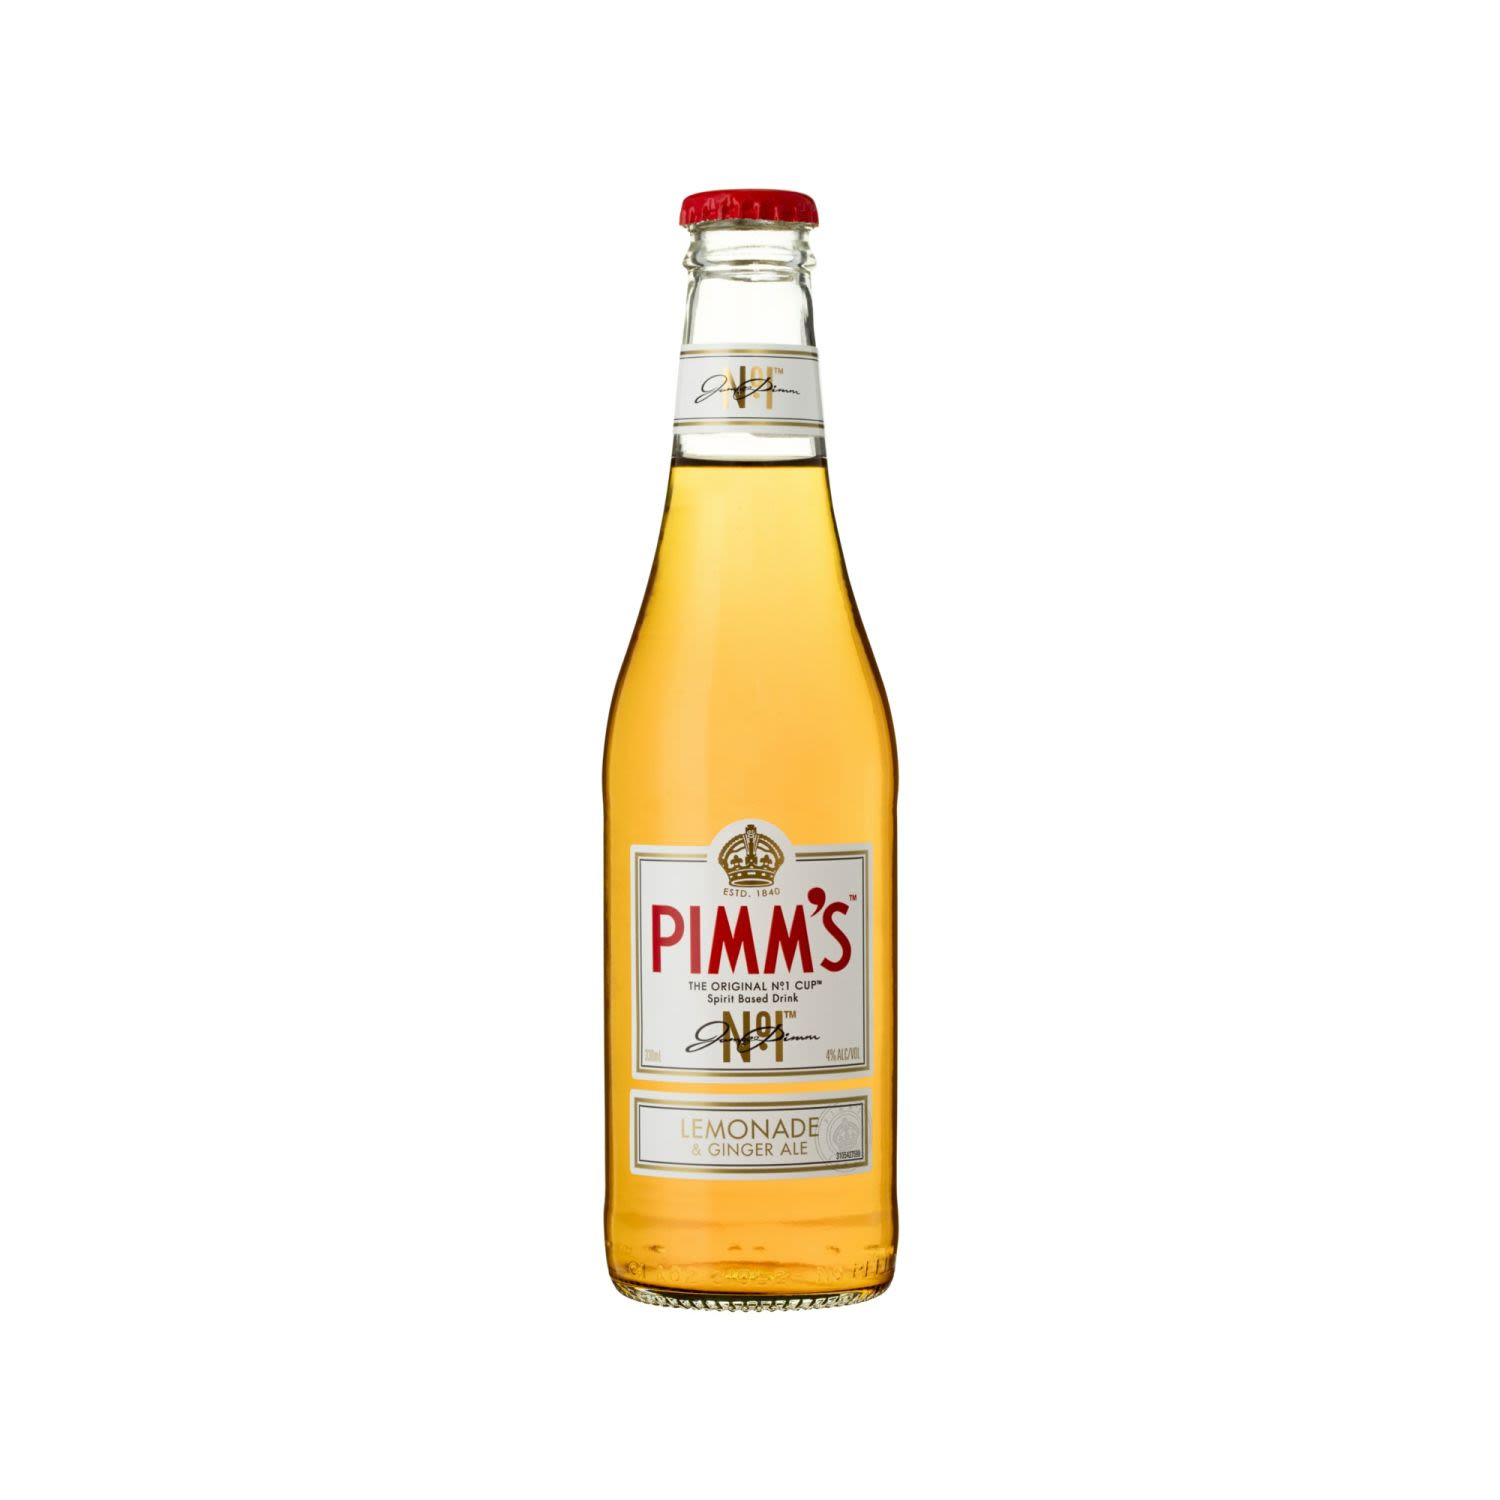 Pimm's No 1 Cup Lemonade and Ginger Ale 330mL Bottle